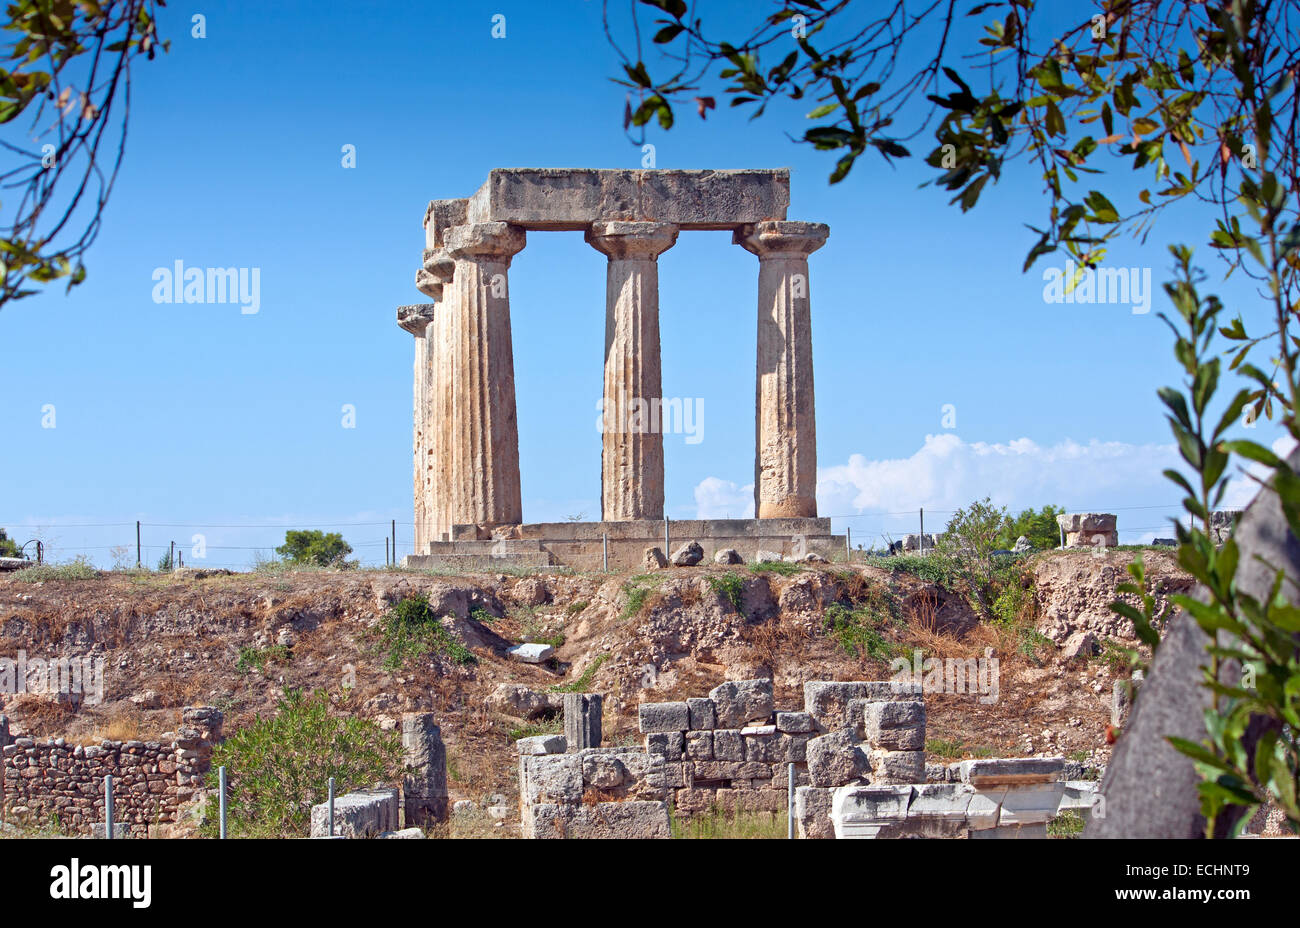 Temple of Apollo at Ancient Corinth, the Peloponnese, Greece Stock Photo